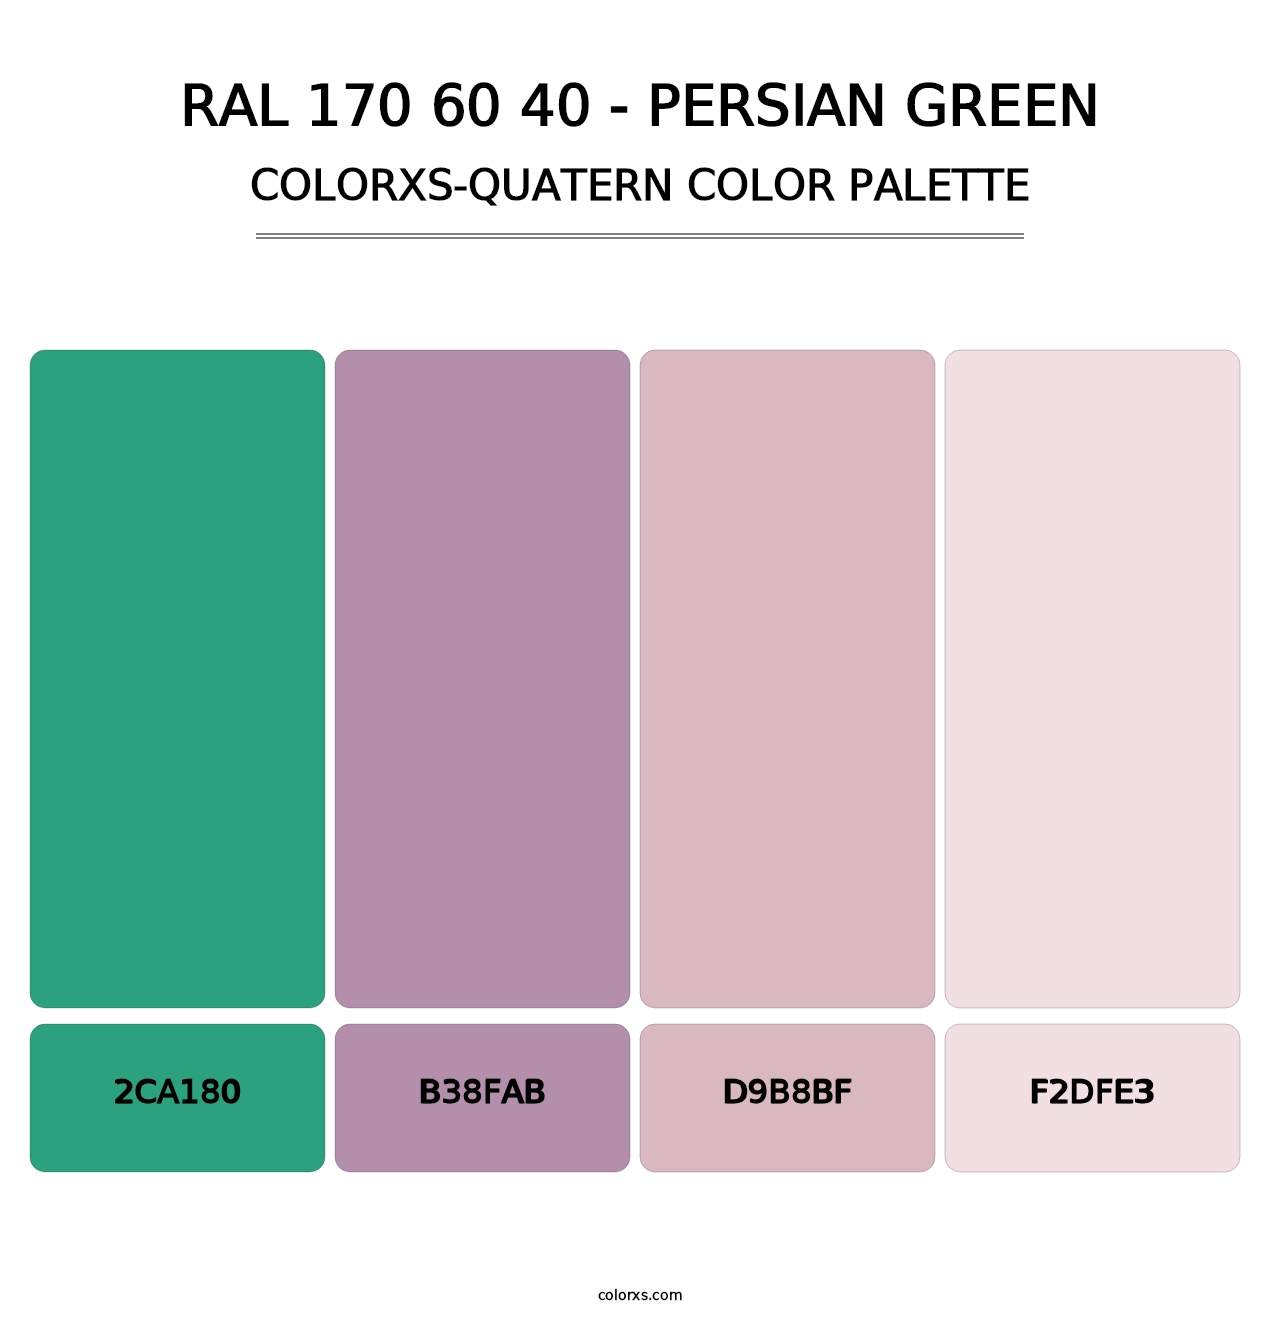 RAL 170 60 40 - Persian Green - Colorxs Quatern Palette